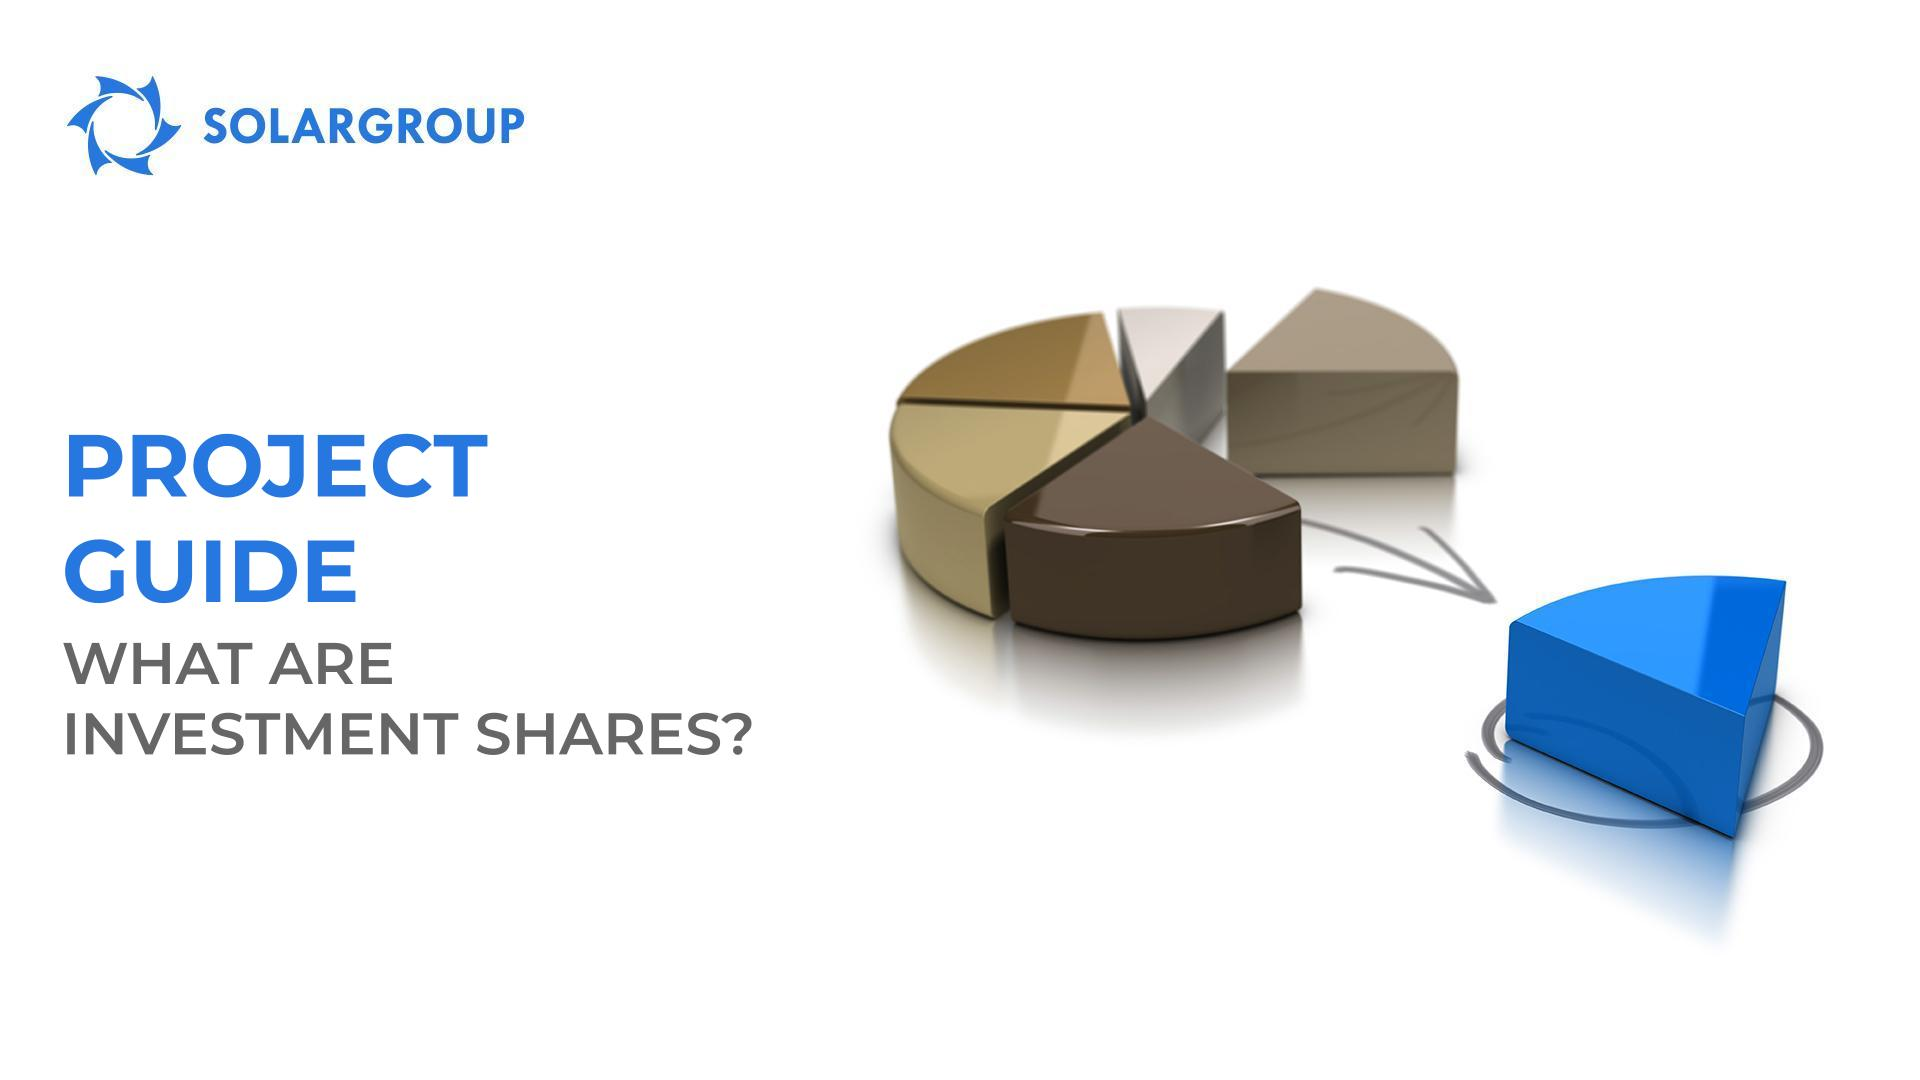 Project guide: what are investment shares?